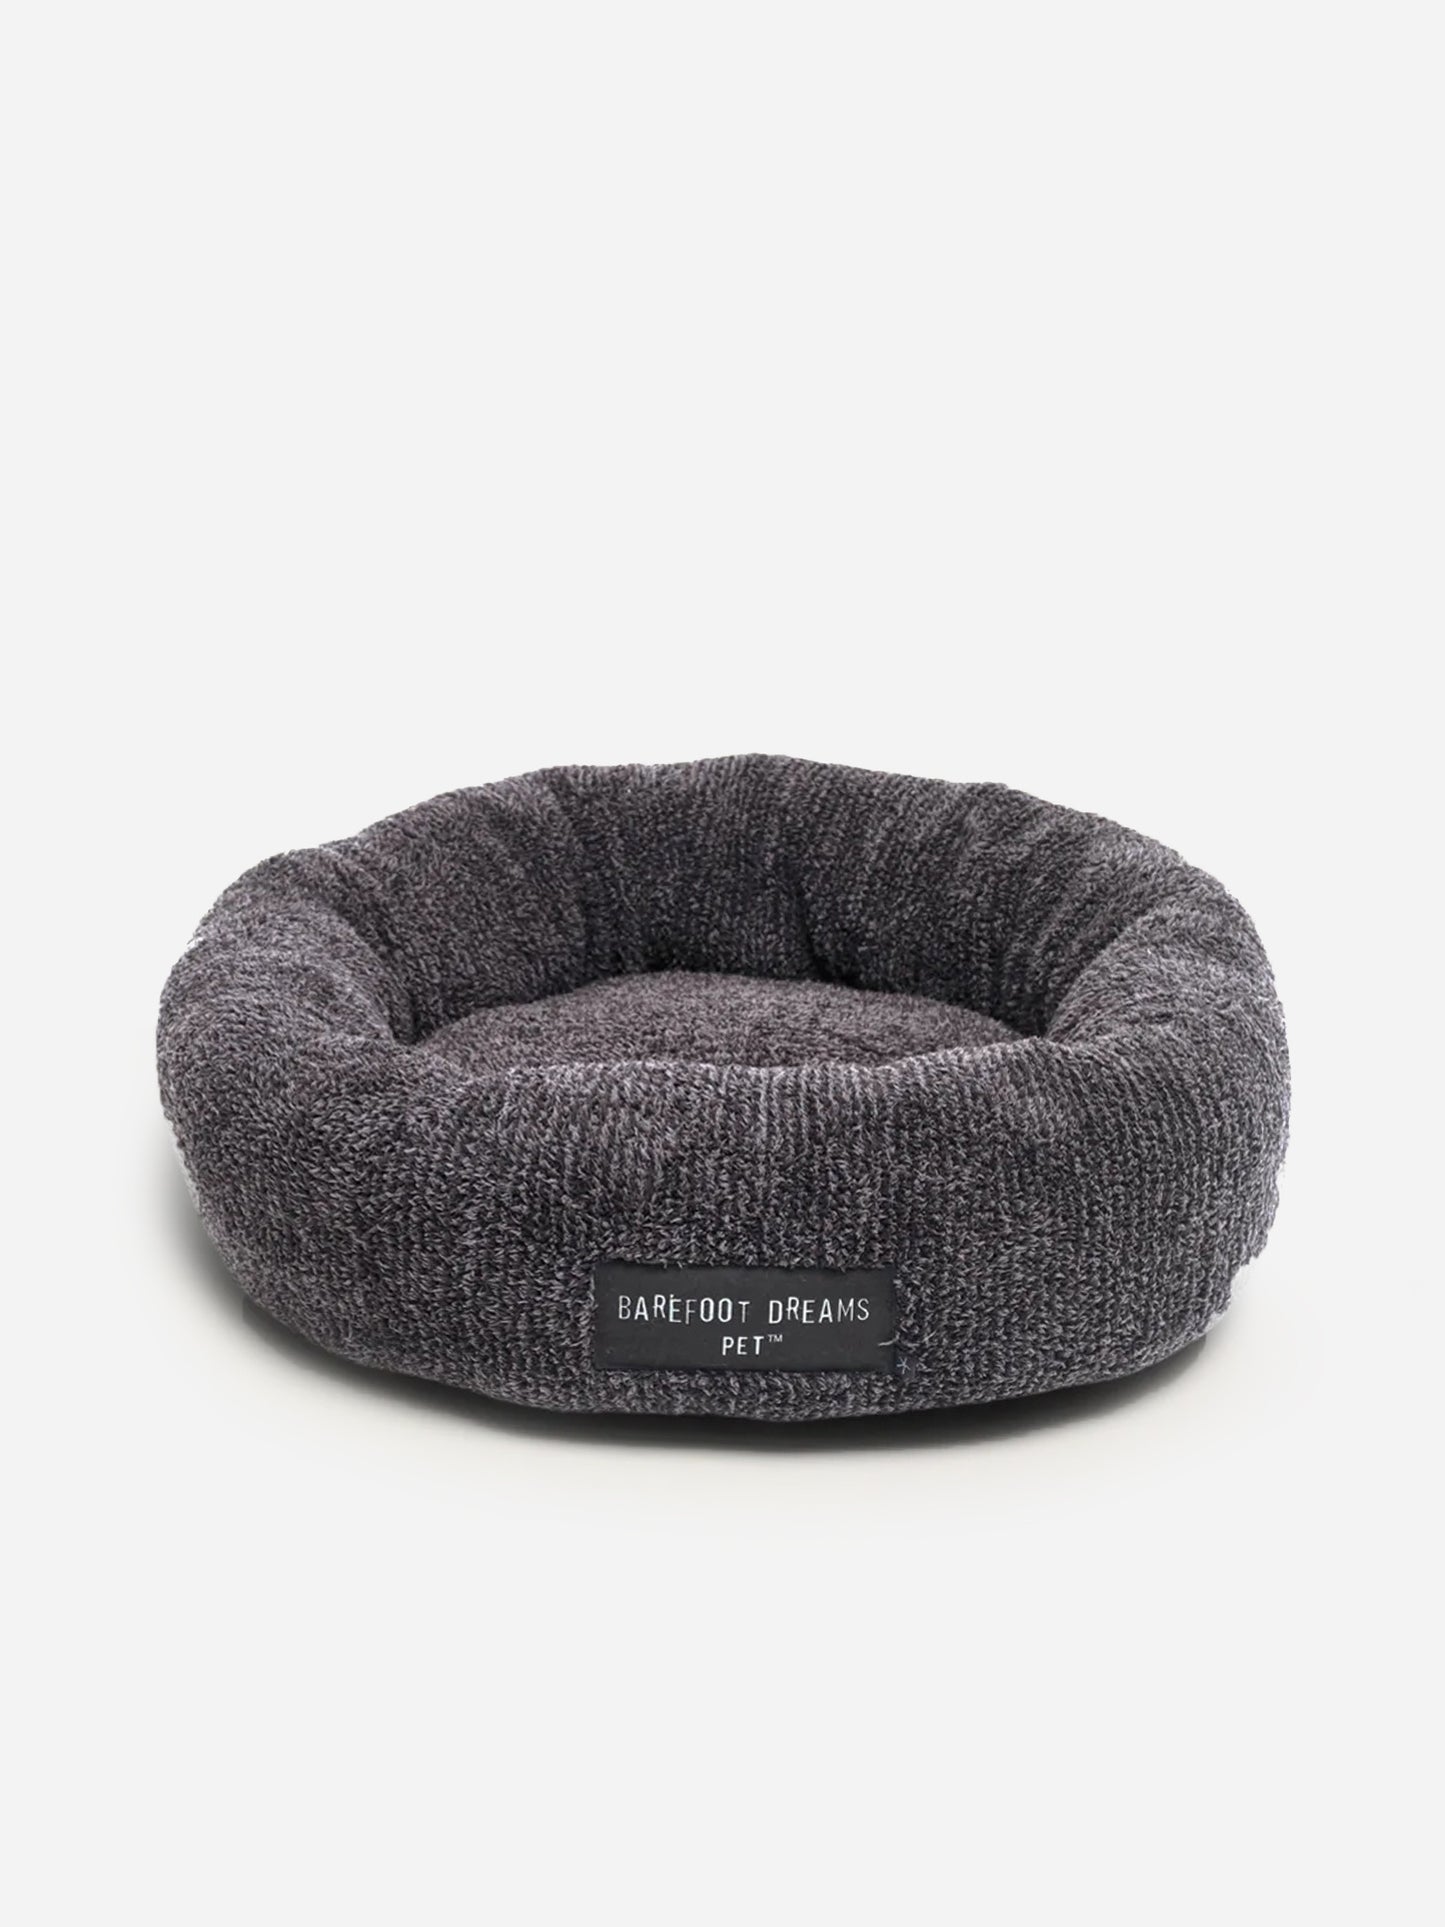 Barefoot Dreams CozyChic® Round Pet Bed